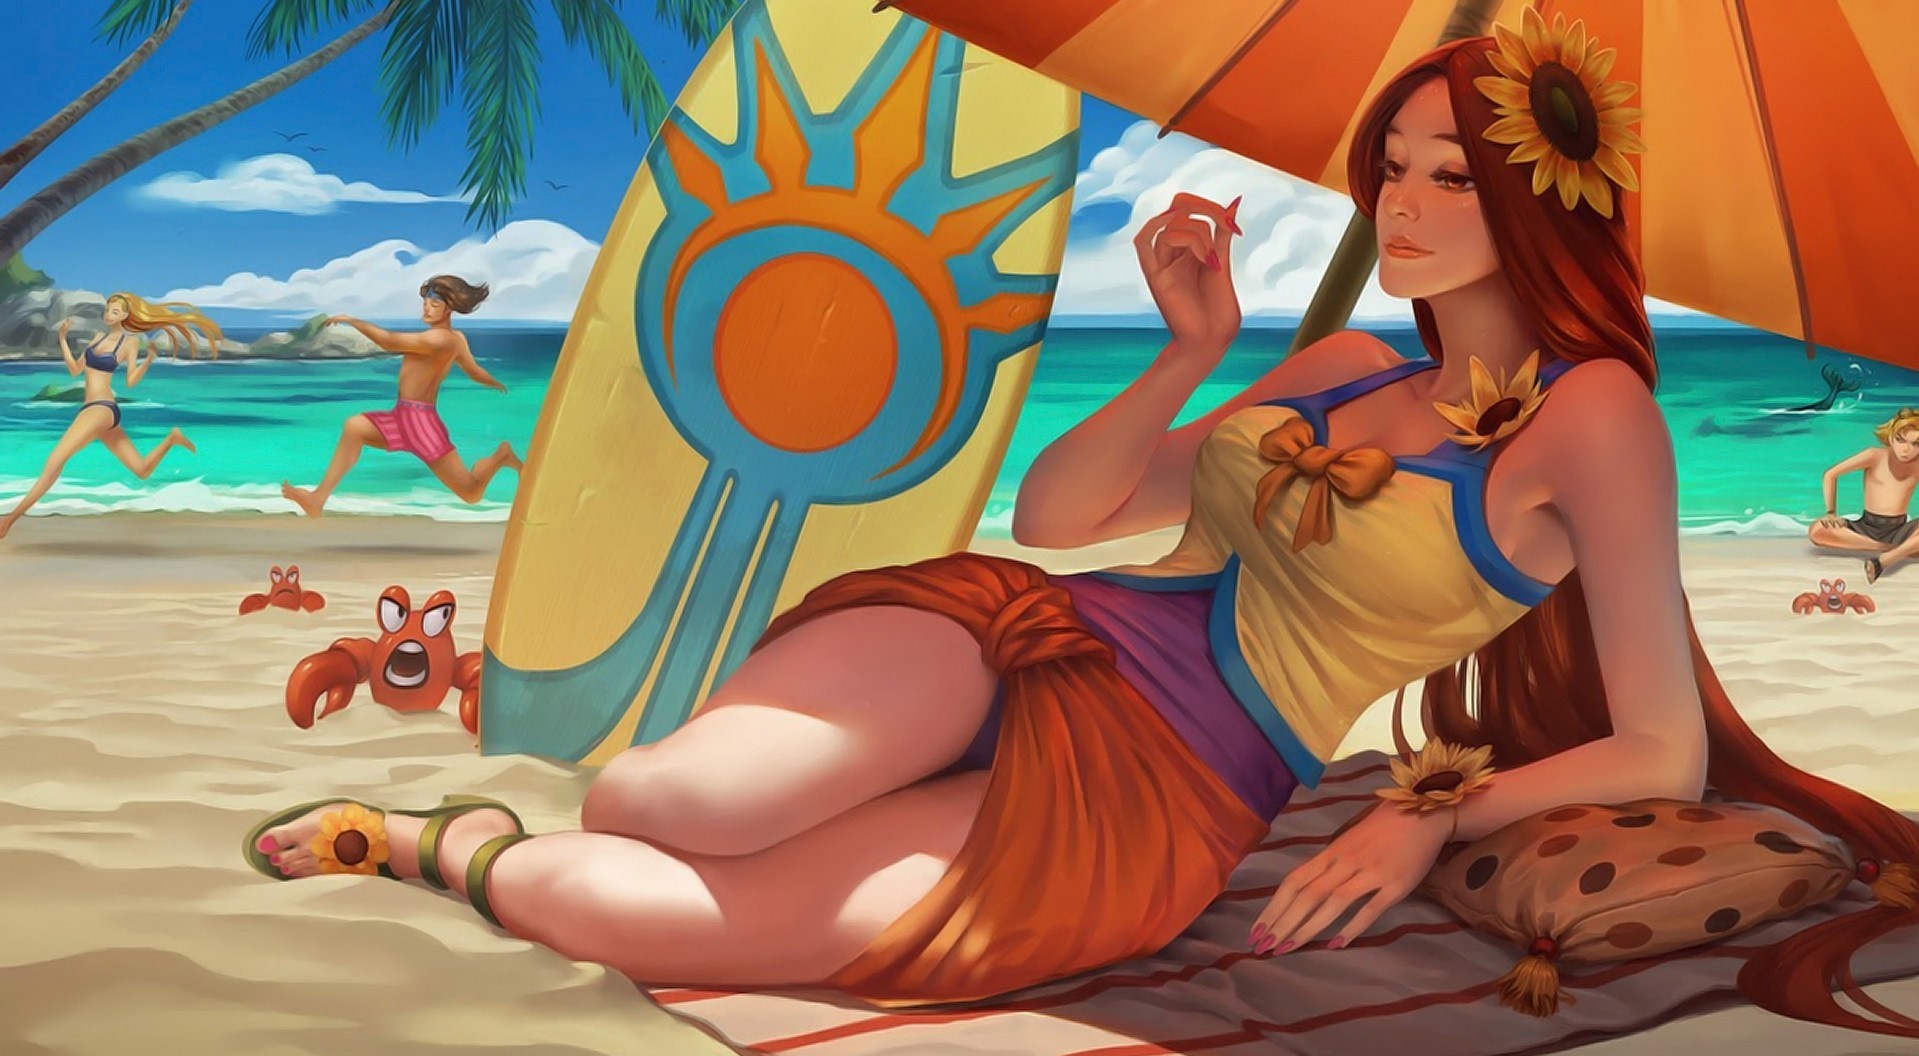 General 1919x1056 artwork League of Legends pool party Leona (League of Legends) PC gaming video game girls sunflowers women on beach beach women outdoors flower in hair legs together